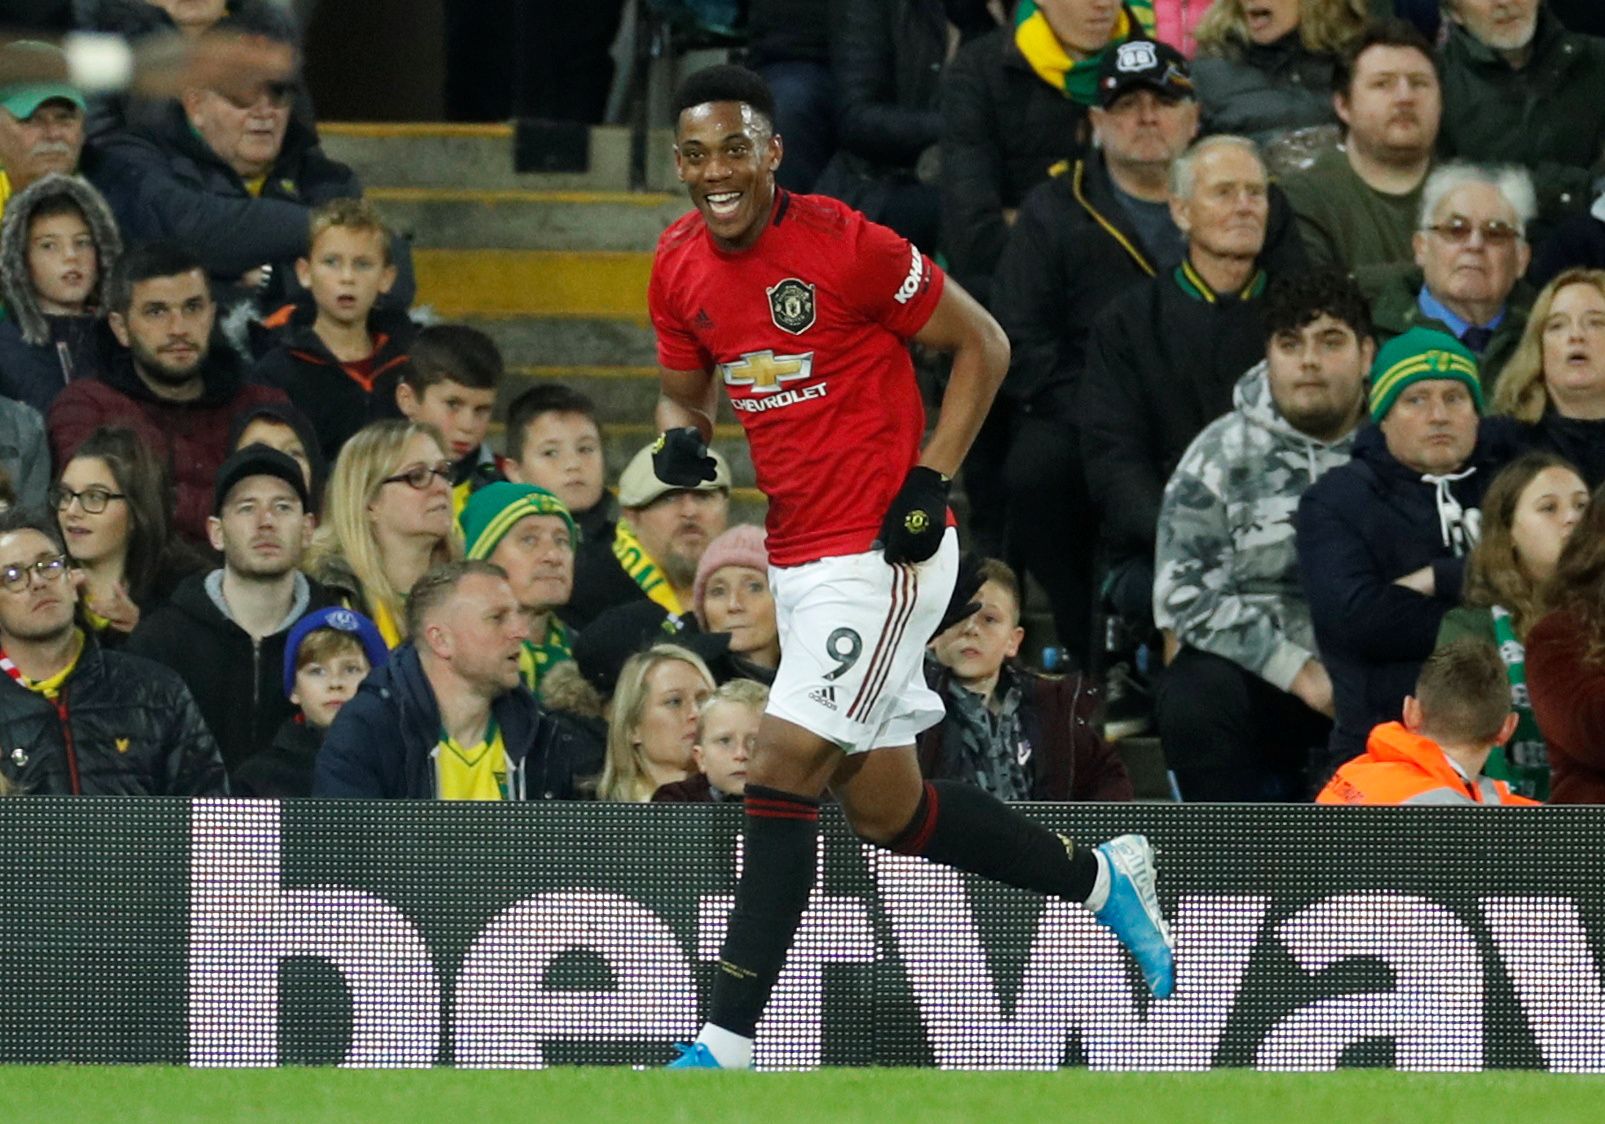 Soccer Football - Premier League - Norwich City v Manchester United - Carrow Road, Norwich, Britain - October 27, 2019  Manchester United's Anthony Martial celebrates scoring their third goal     Action Images via Reuters/John Sibley  EDITORIAL USE ONLY. No use with unauthorized audio, video, data, fixture lists, club/league logos or 